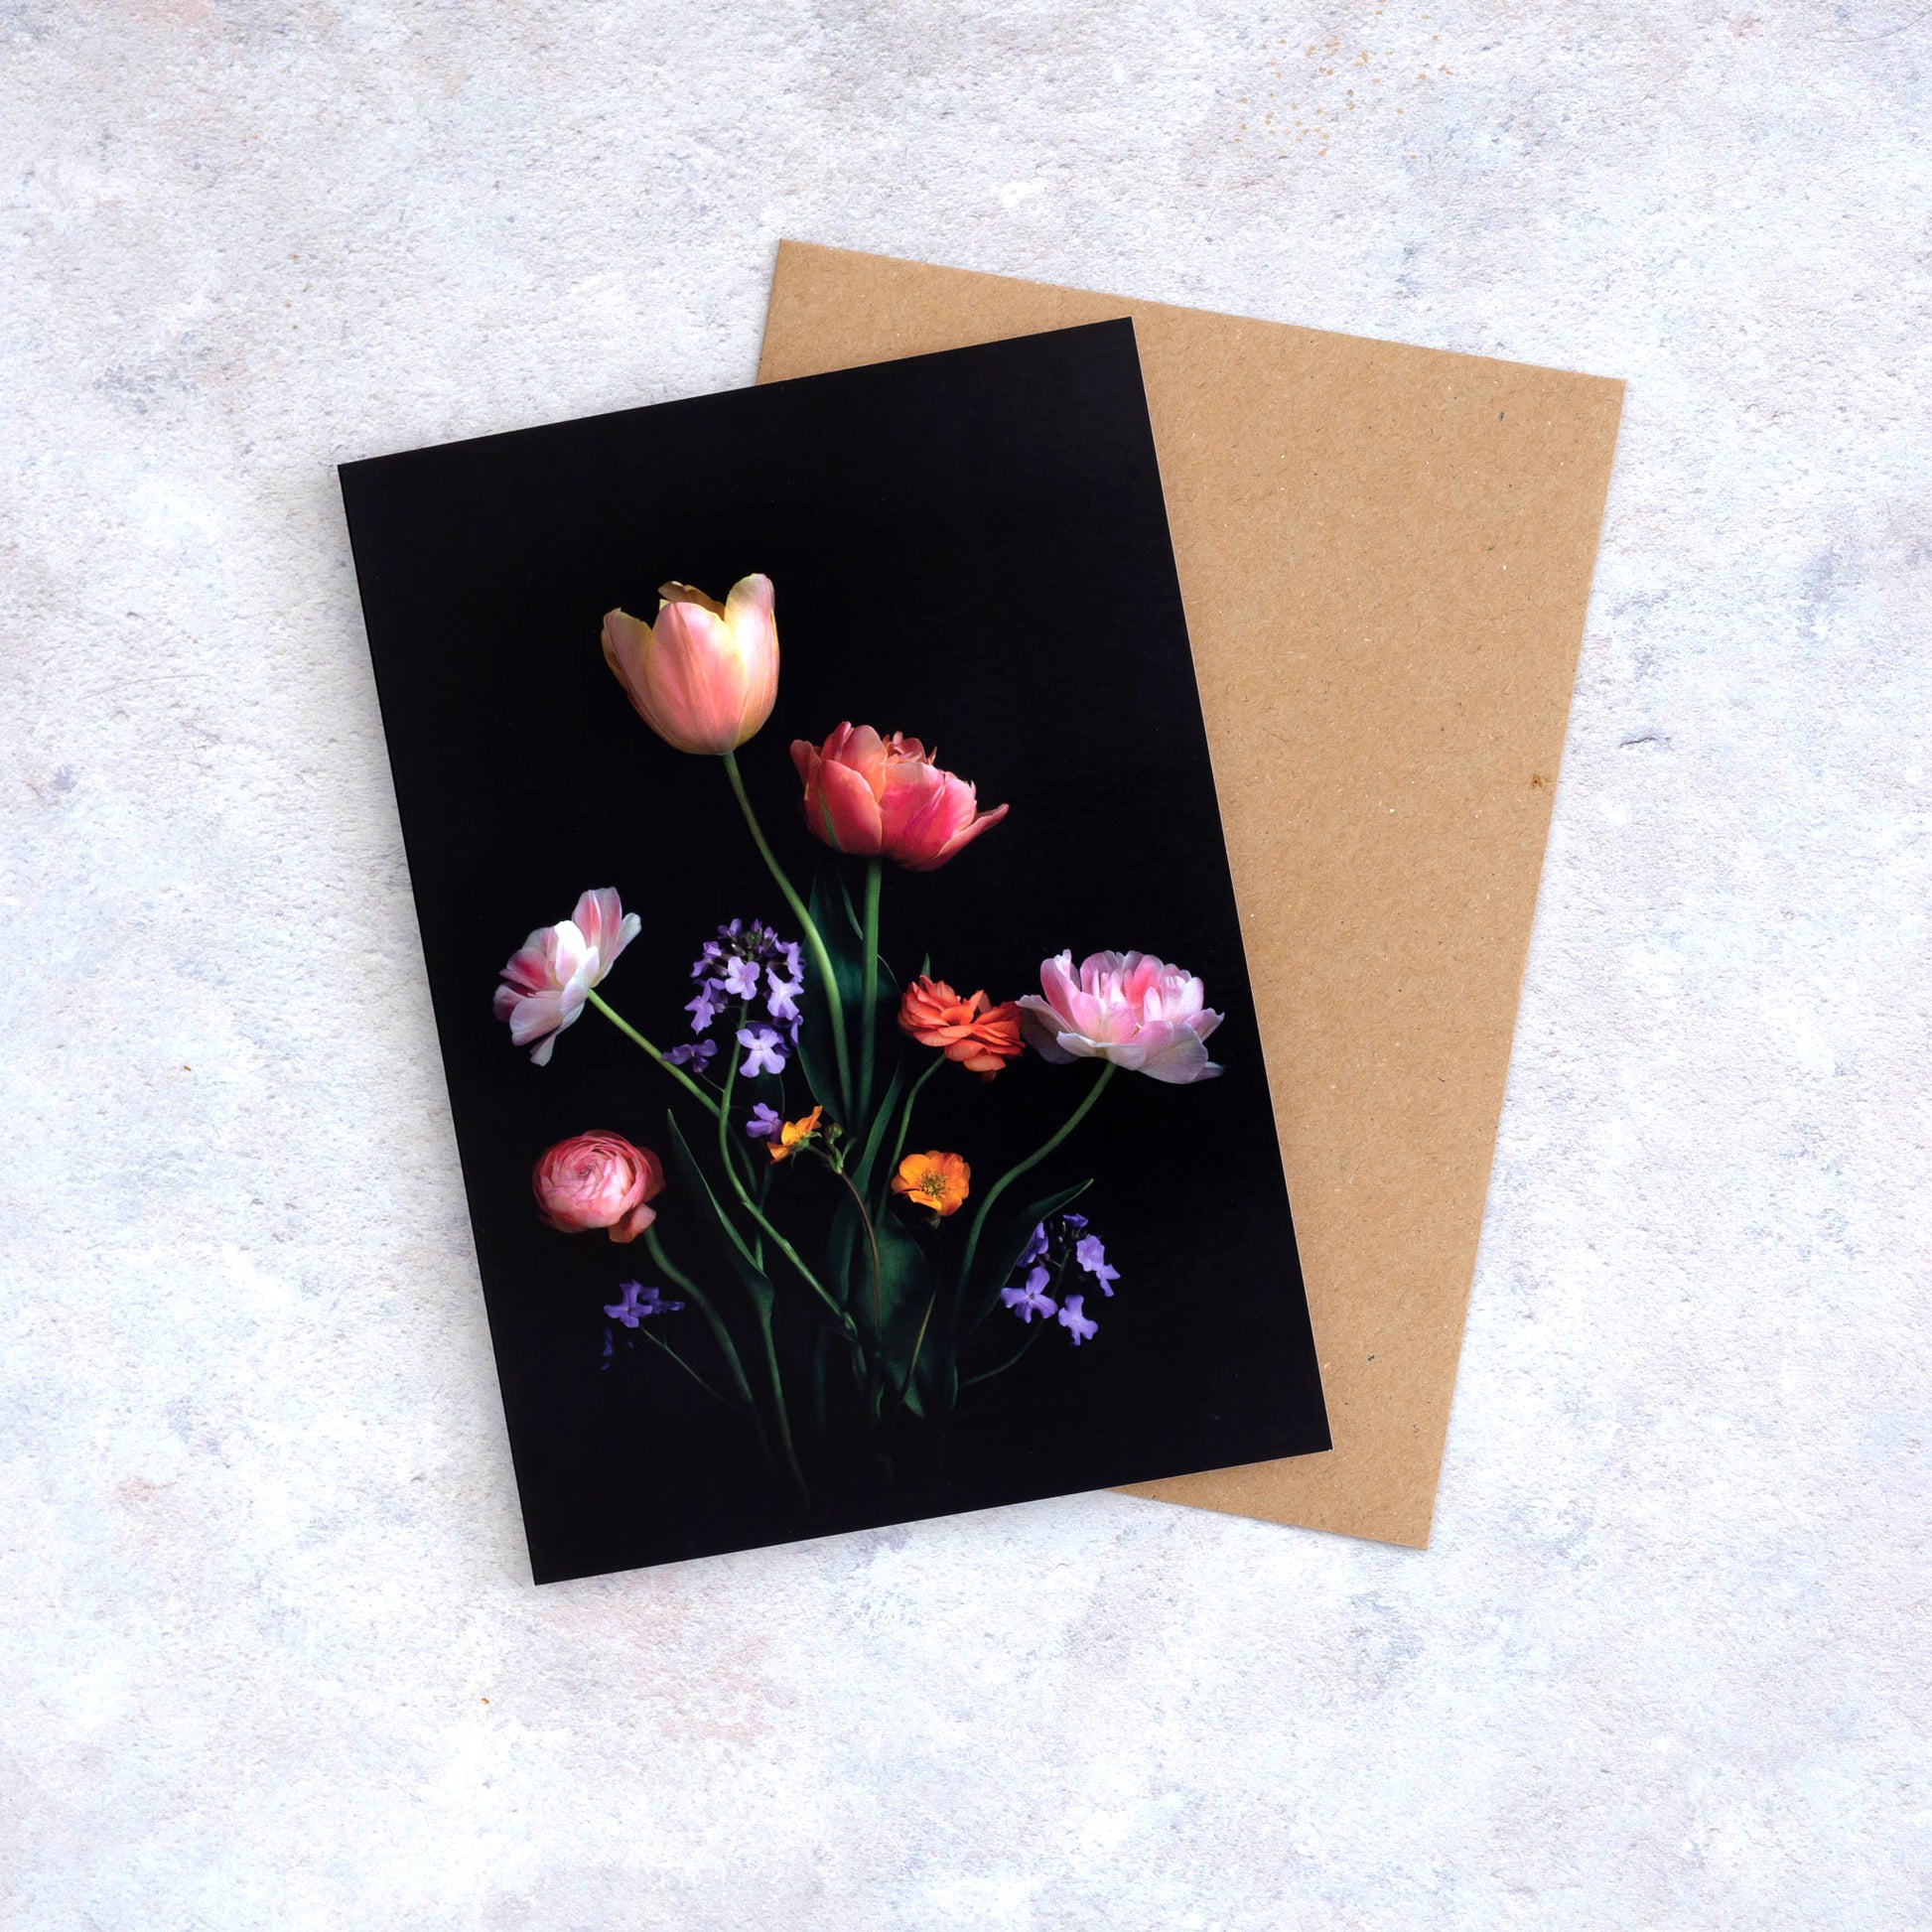 Botanical print greeting card with Tulips, Ranunculus, Geums and Honesty photographed on a black background.